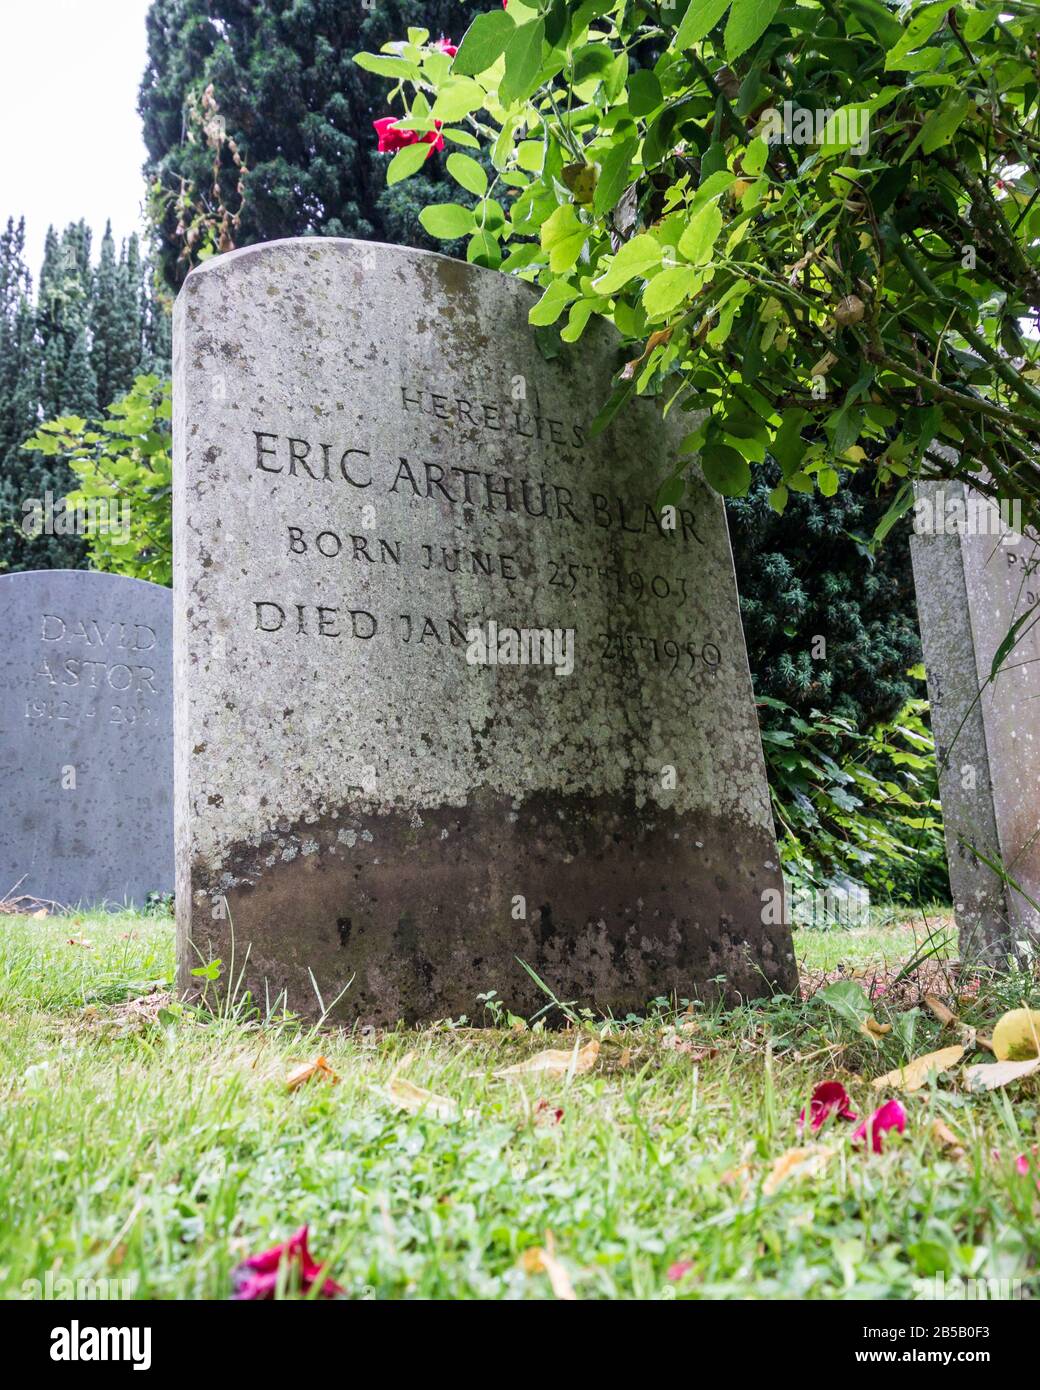 The grave of George Orwell (Eric Arthur Blair) in the graveyard of All Saints' Church, Sutton Courtenay, Oxfordshire, United Kingdom. Stock Photo